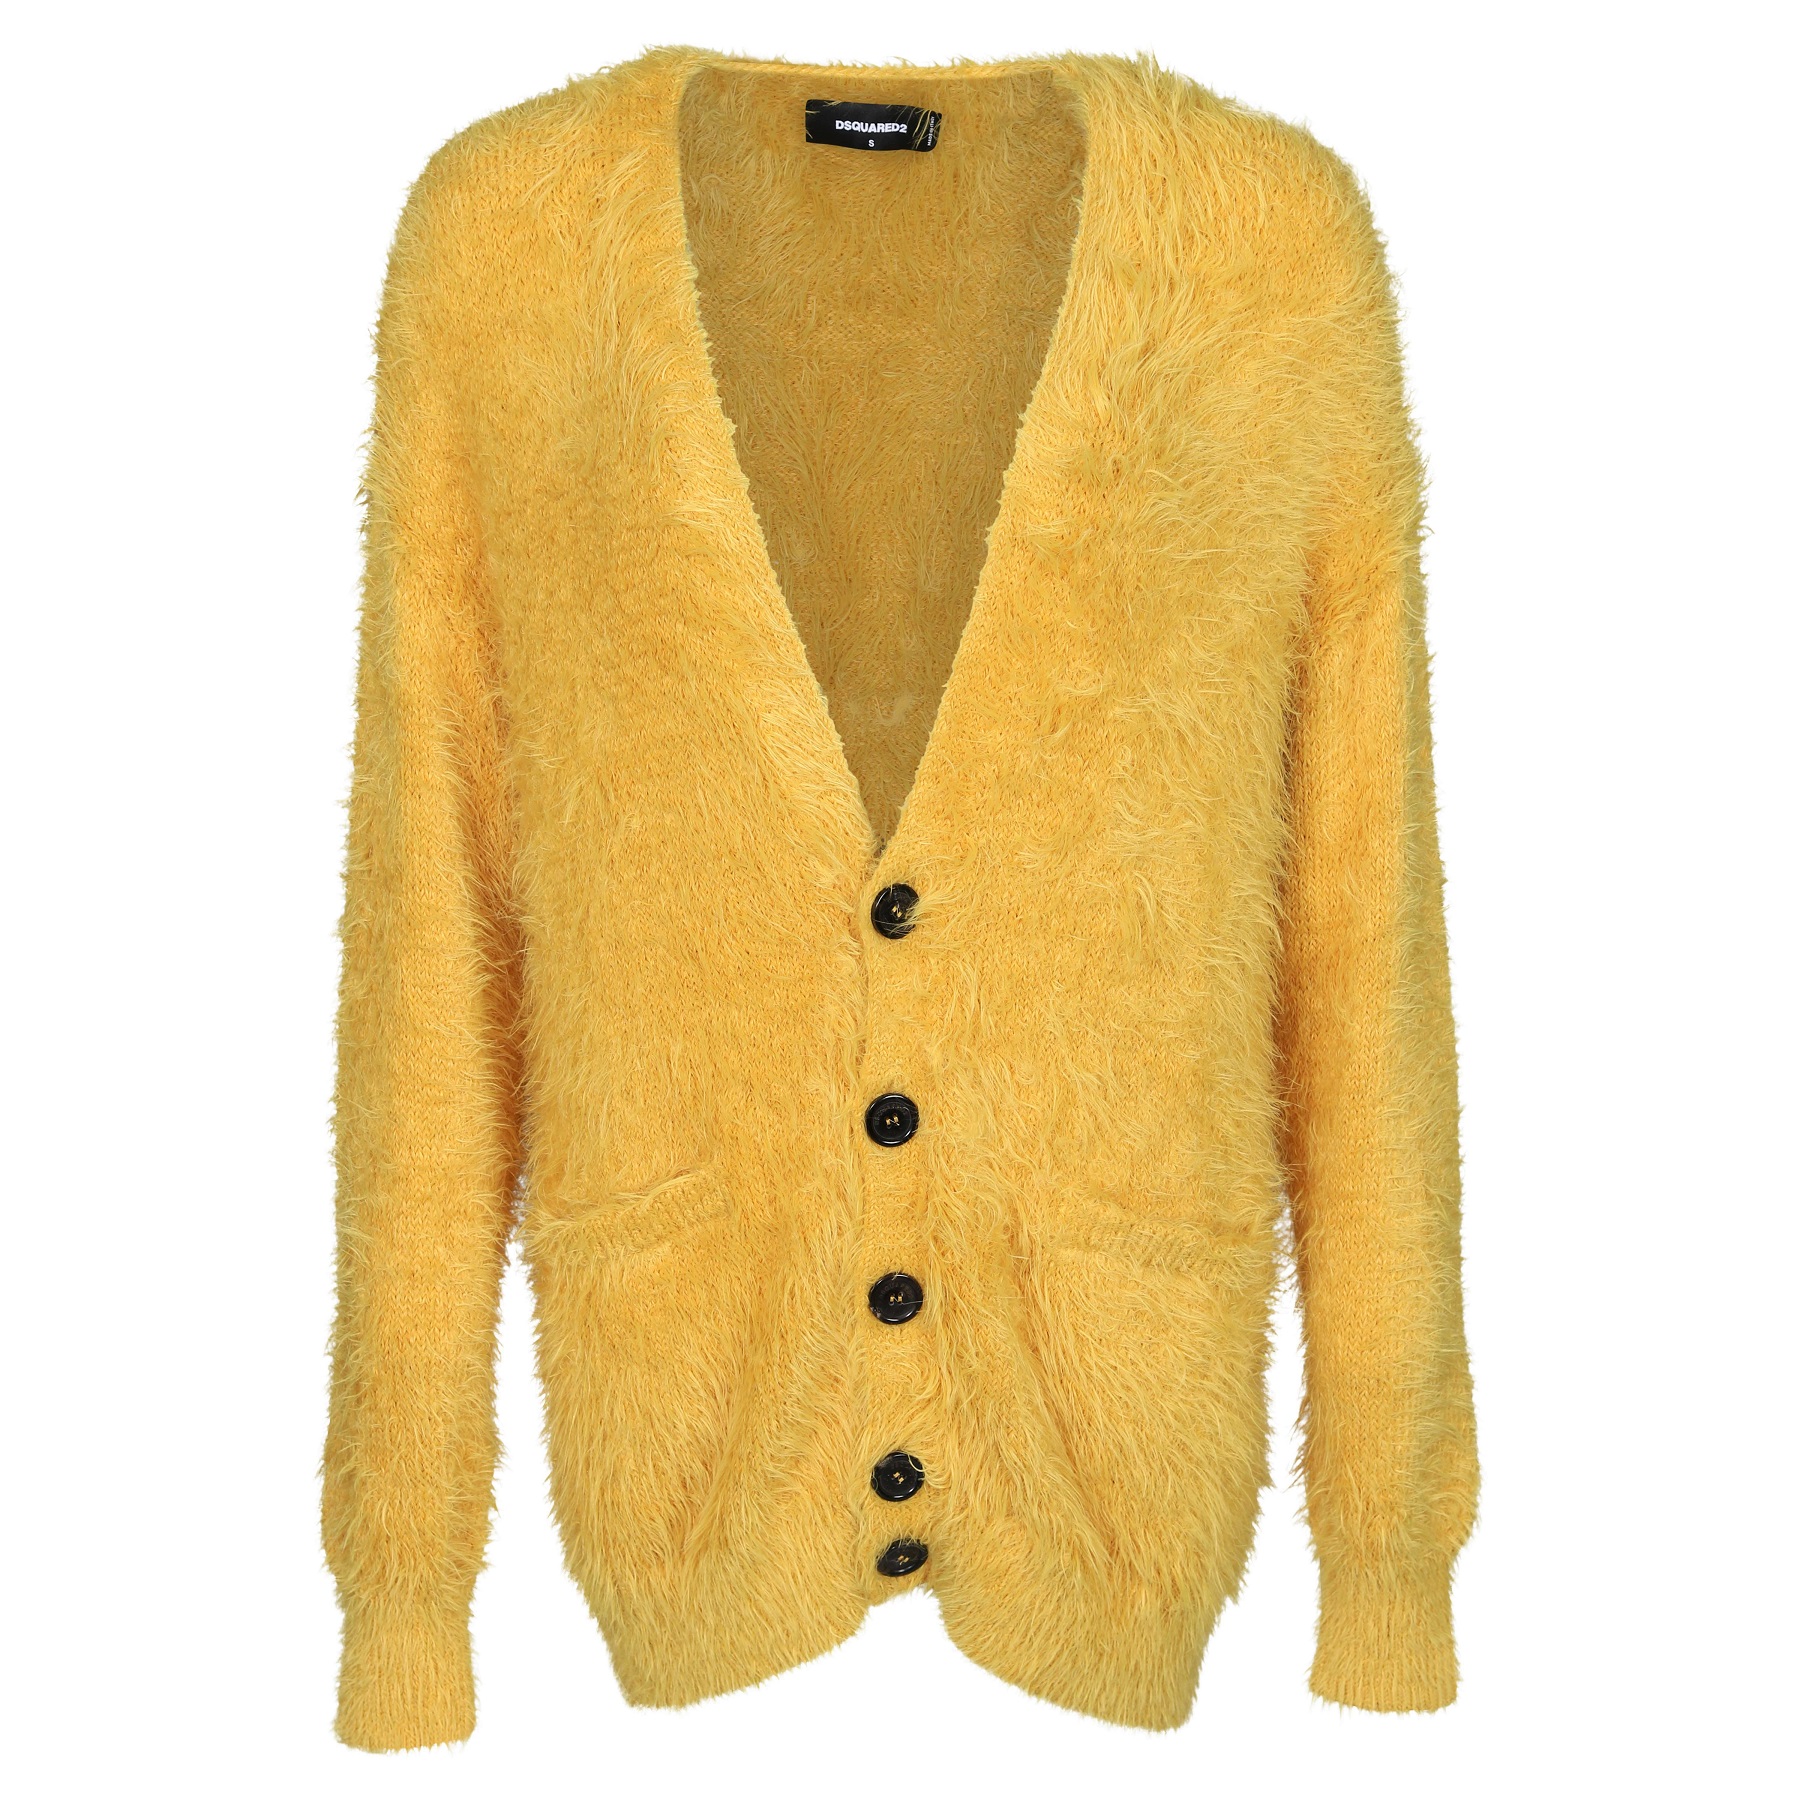 DSQUARED2 Fuzzy Knit Cardigan in Yellow